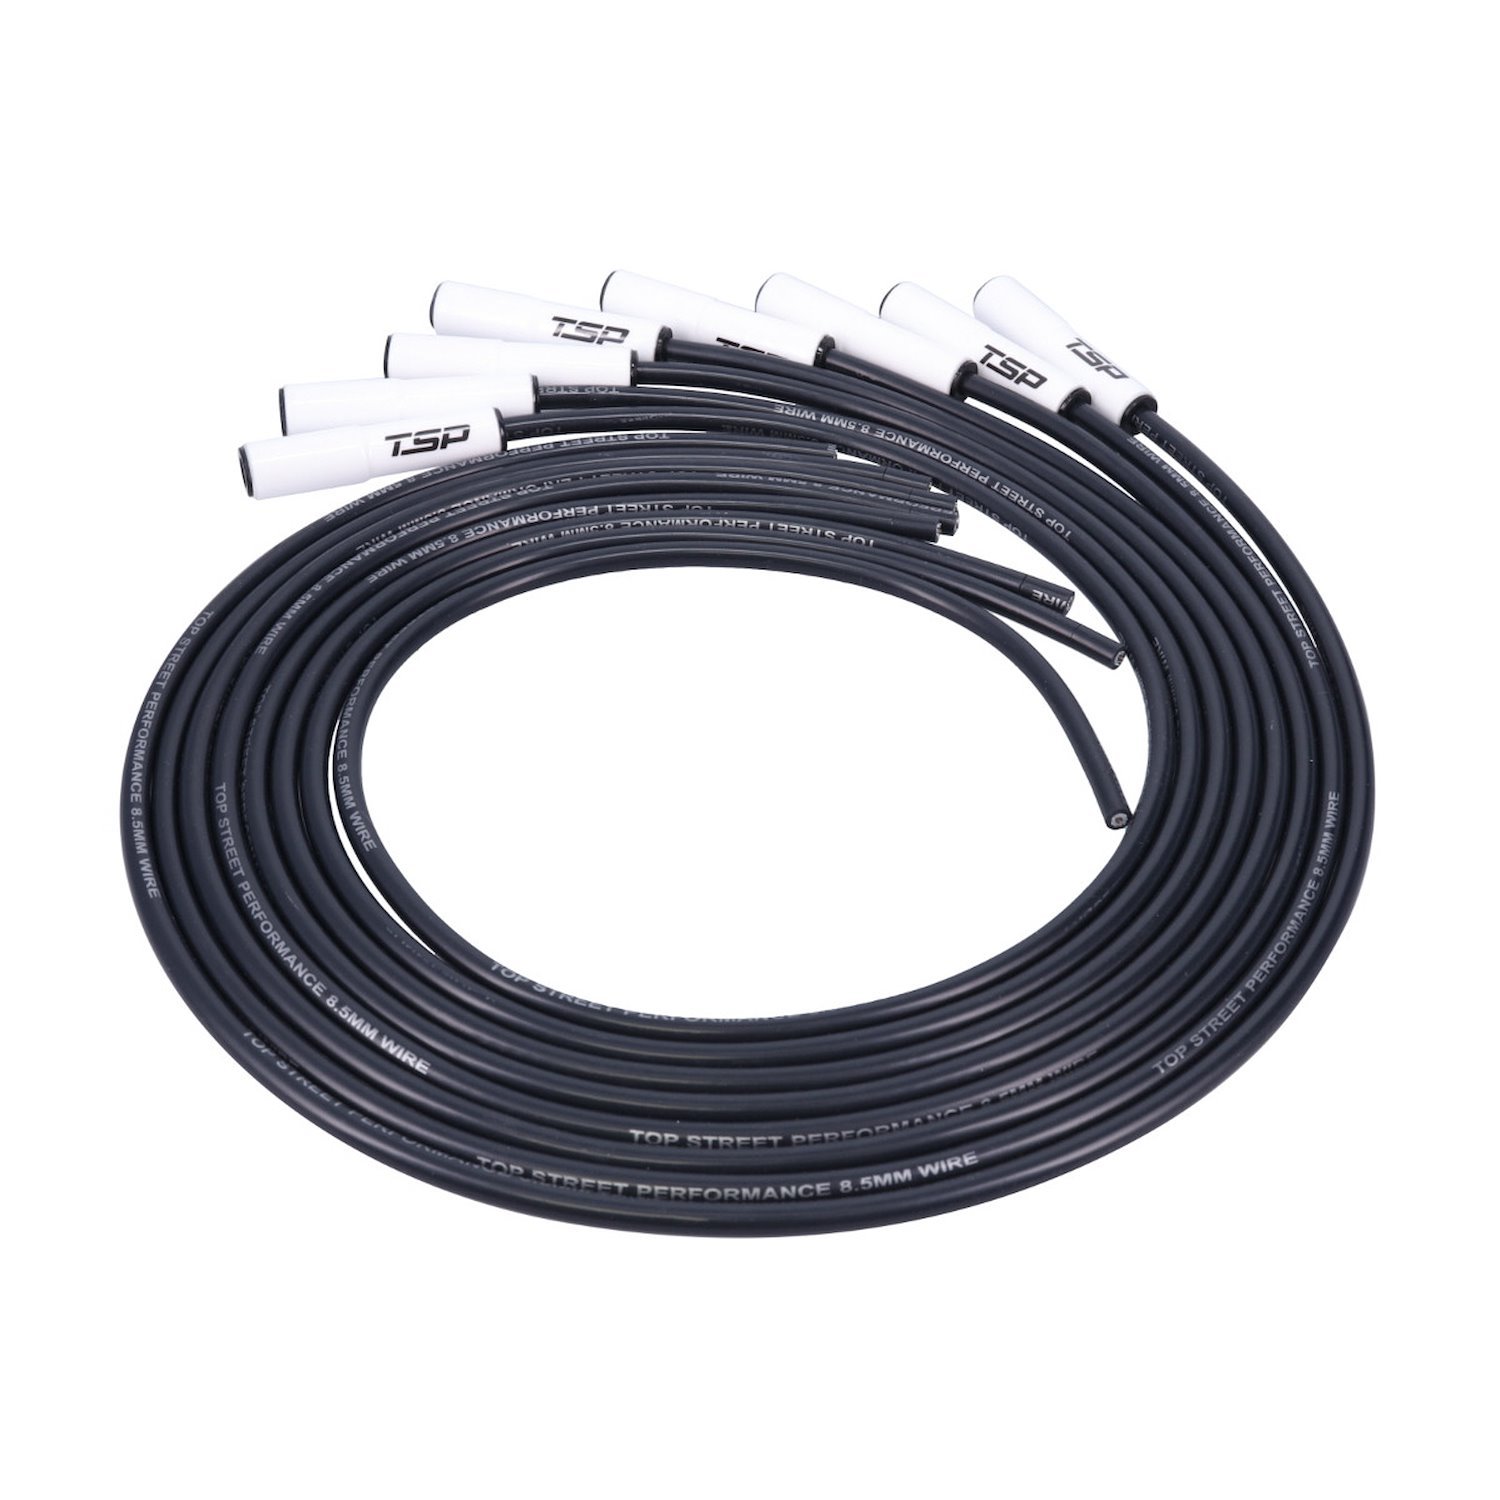 81025CE LS/LT Universal Ignition Wires, 8.5mm Black, Straight White Ceramic Plug Boots